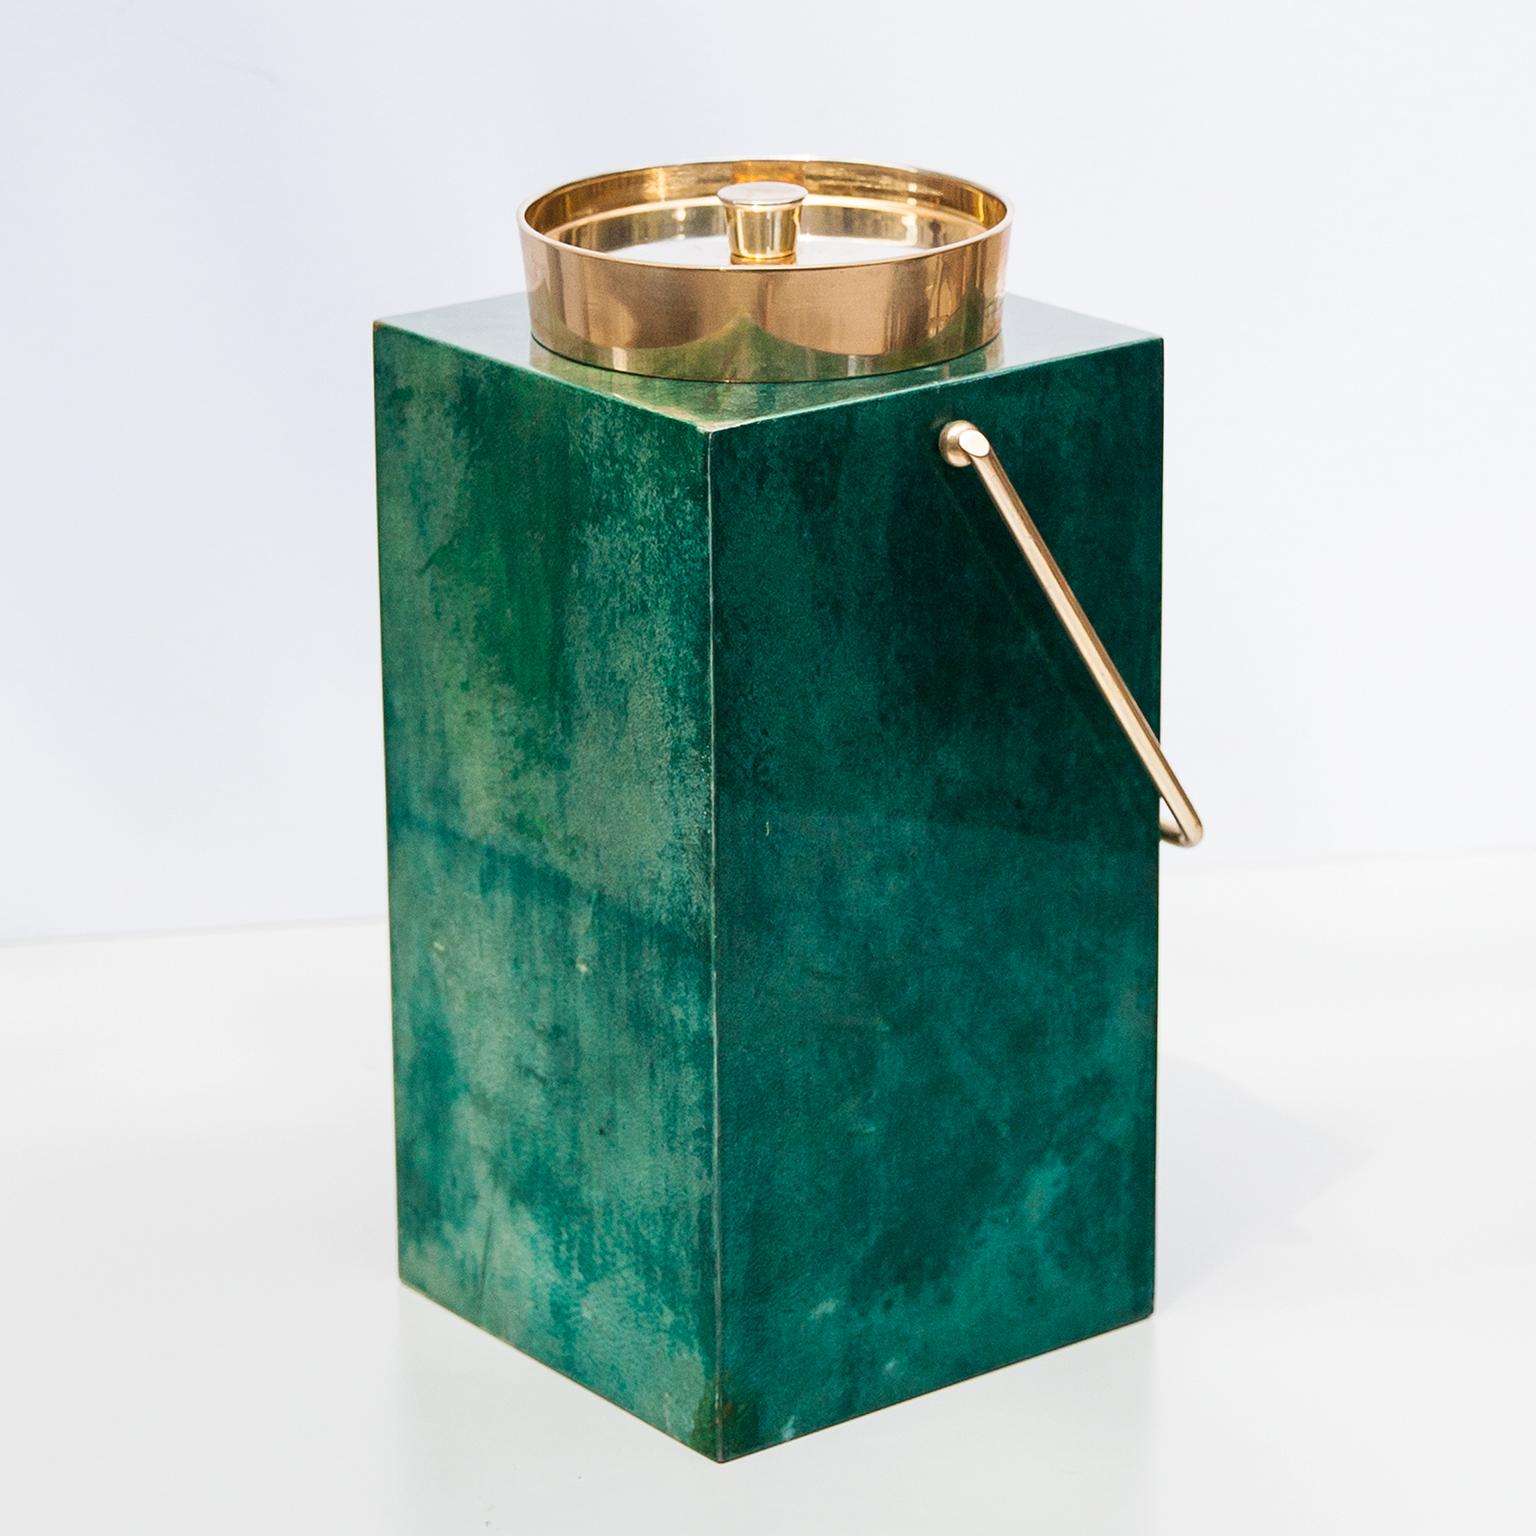 Huge Aldo Tura green parchment champagne, wine cooler or ice bucket with a brass inlay. This particular cooler was executed in the 1960s and is in excellent vintage condition.
Along with artists like Piero Fornasetti and Carlo Bugatti, Aldo Tura